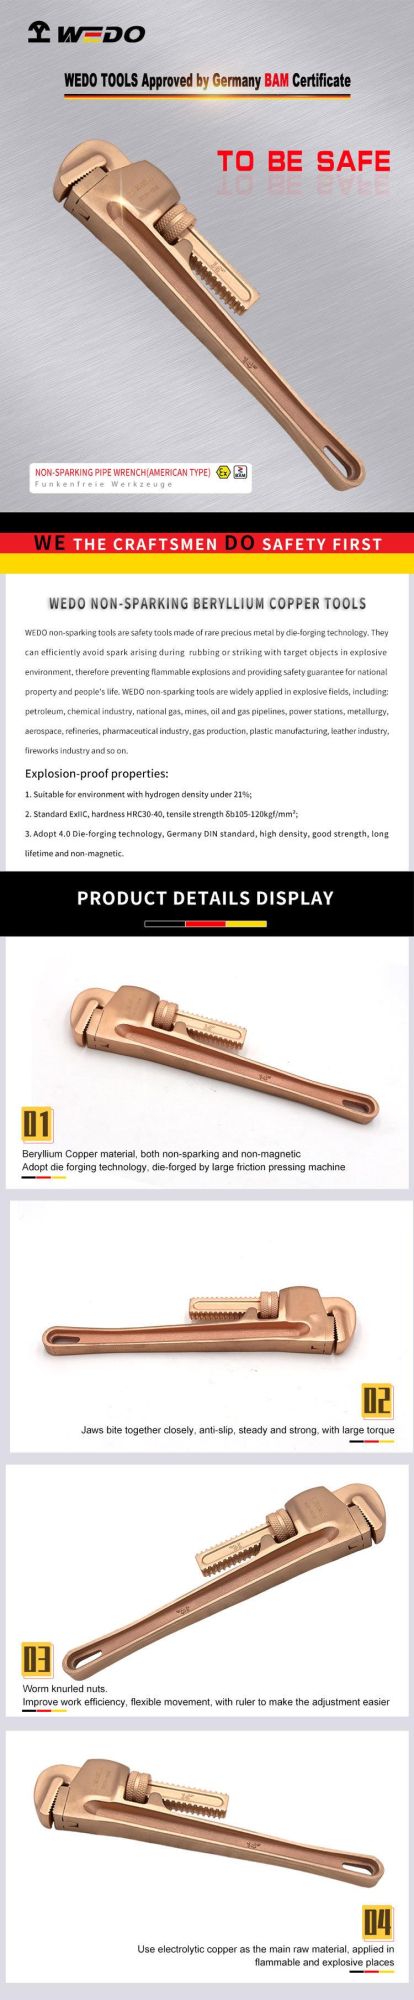 WEDO High Quality Beryllium Copper Pipe Wrench (American Type) Non-Magnetic/Sparking Pipe Spanner